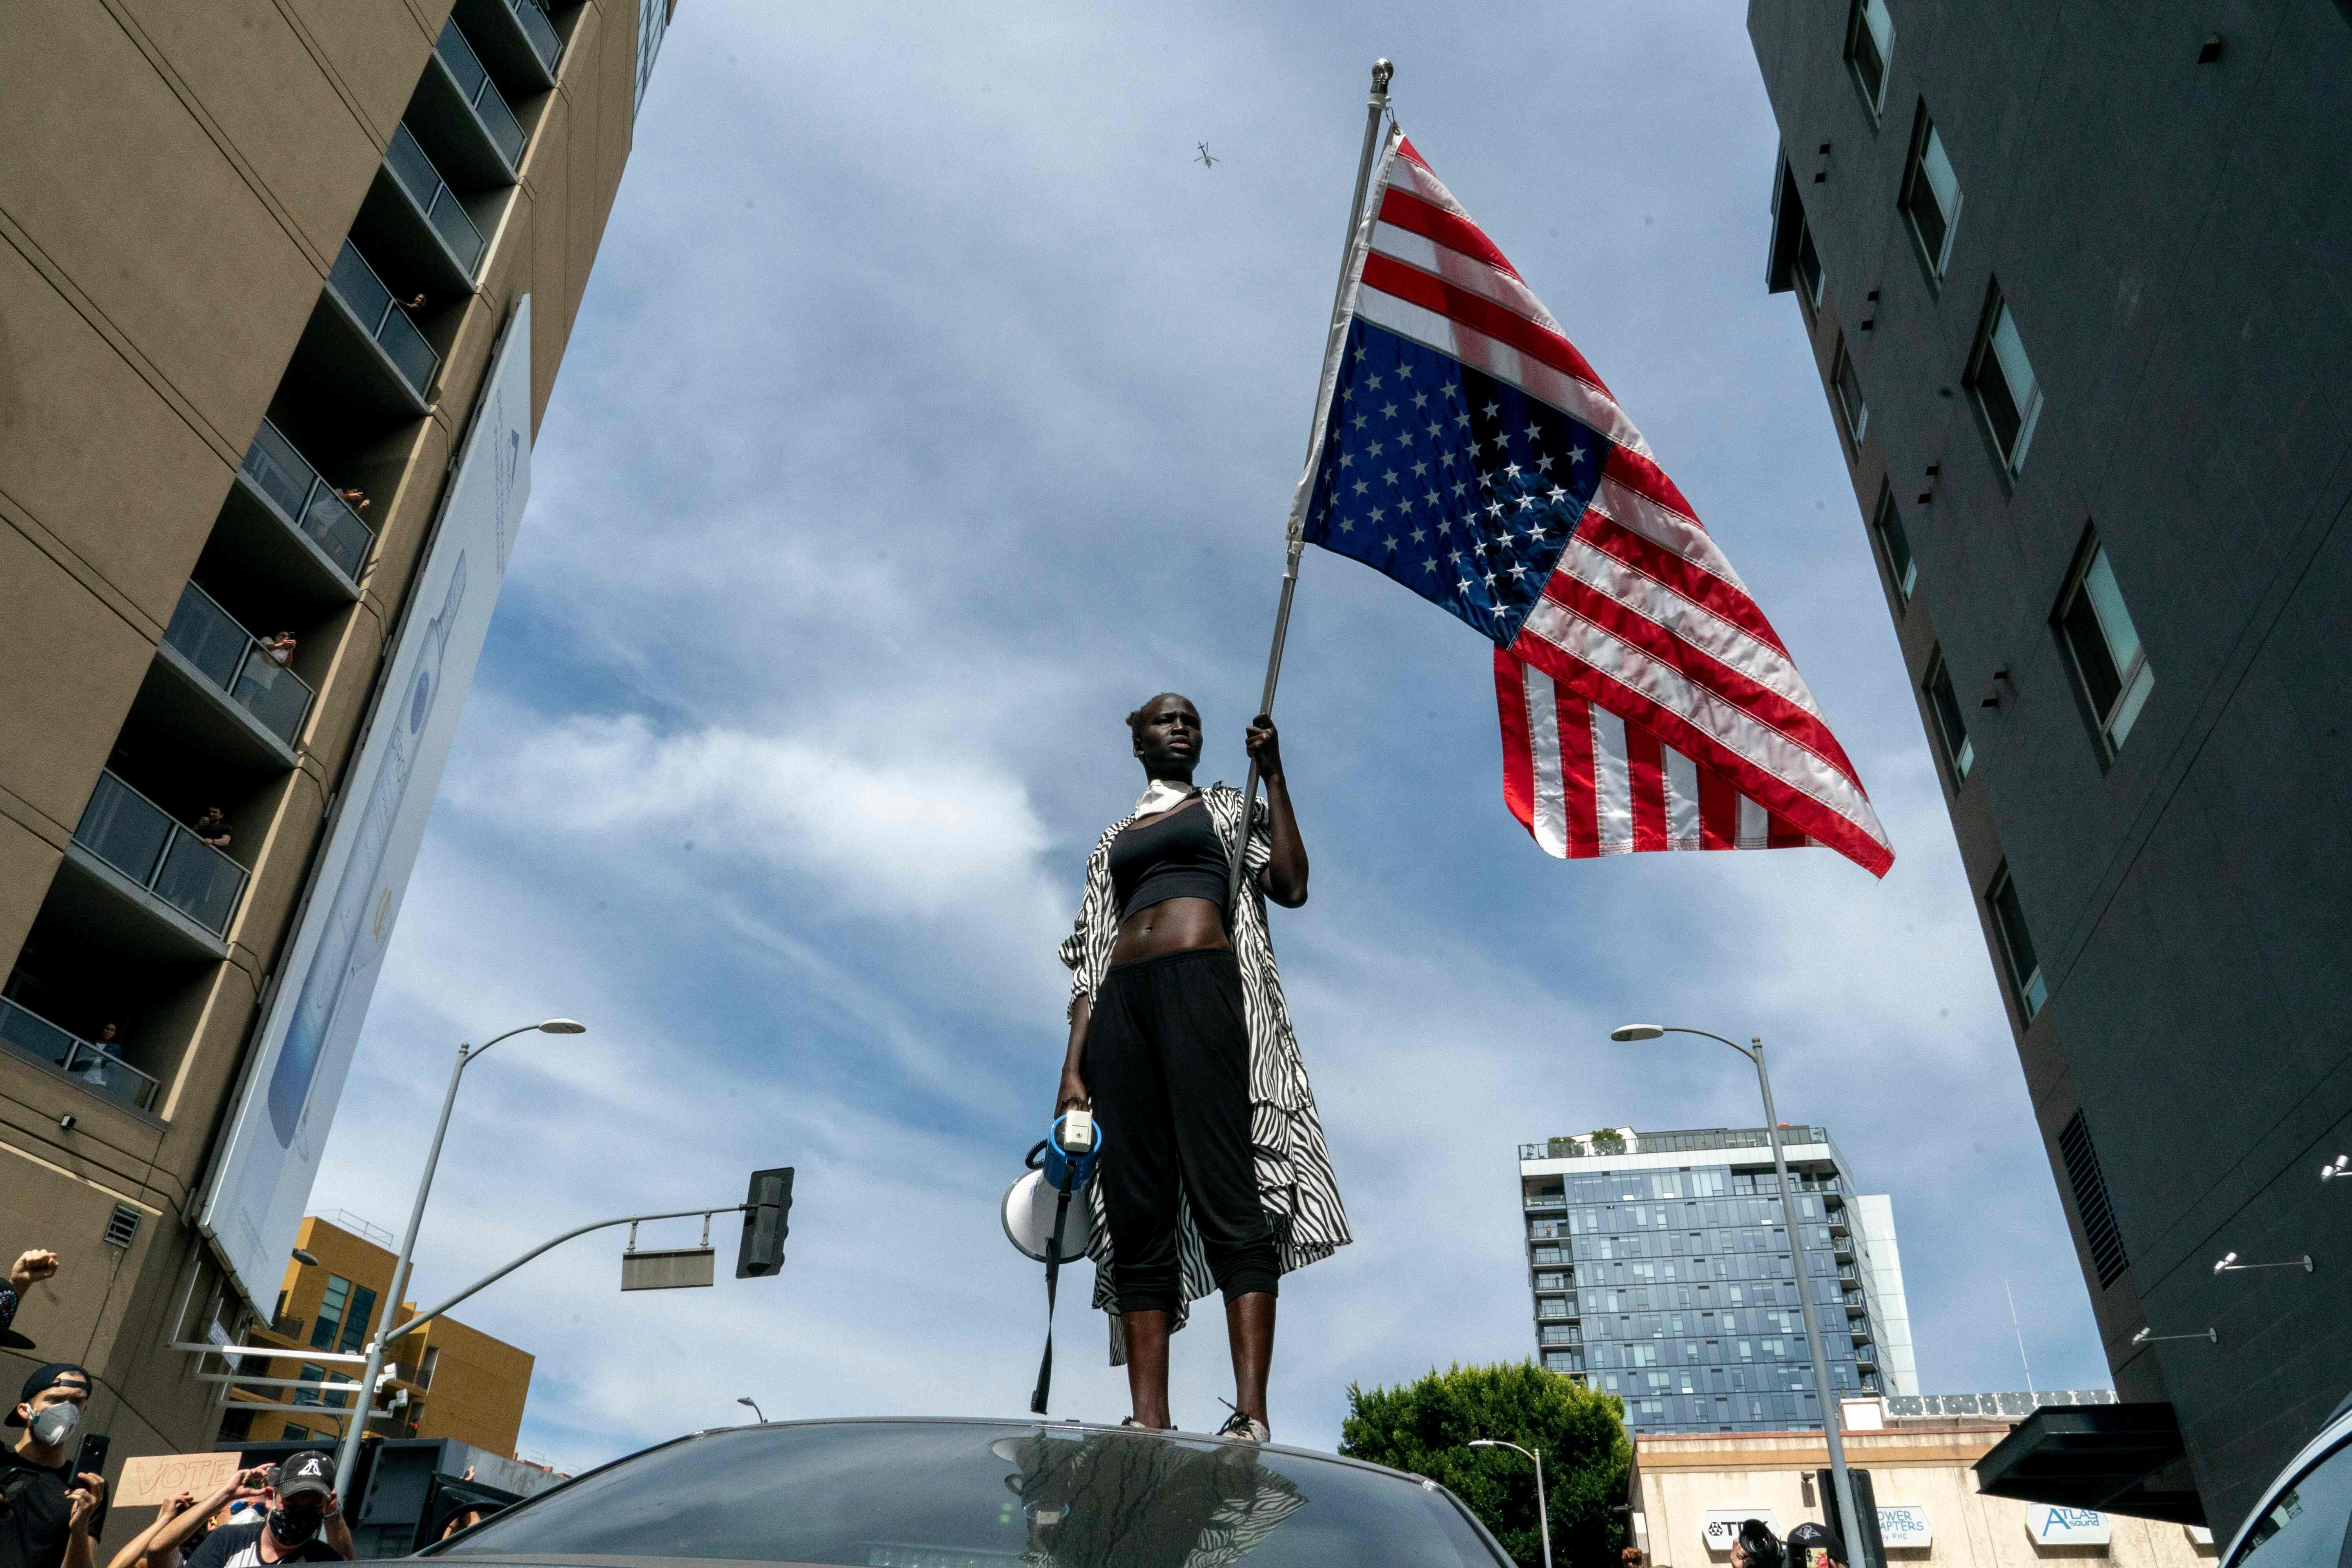 A protester in Los Angeles holds an American flag upside-down, which is considered a symbol of distress. Photo: AFP